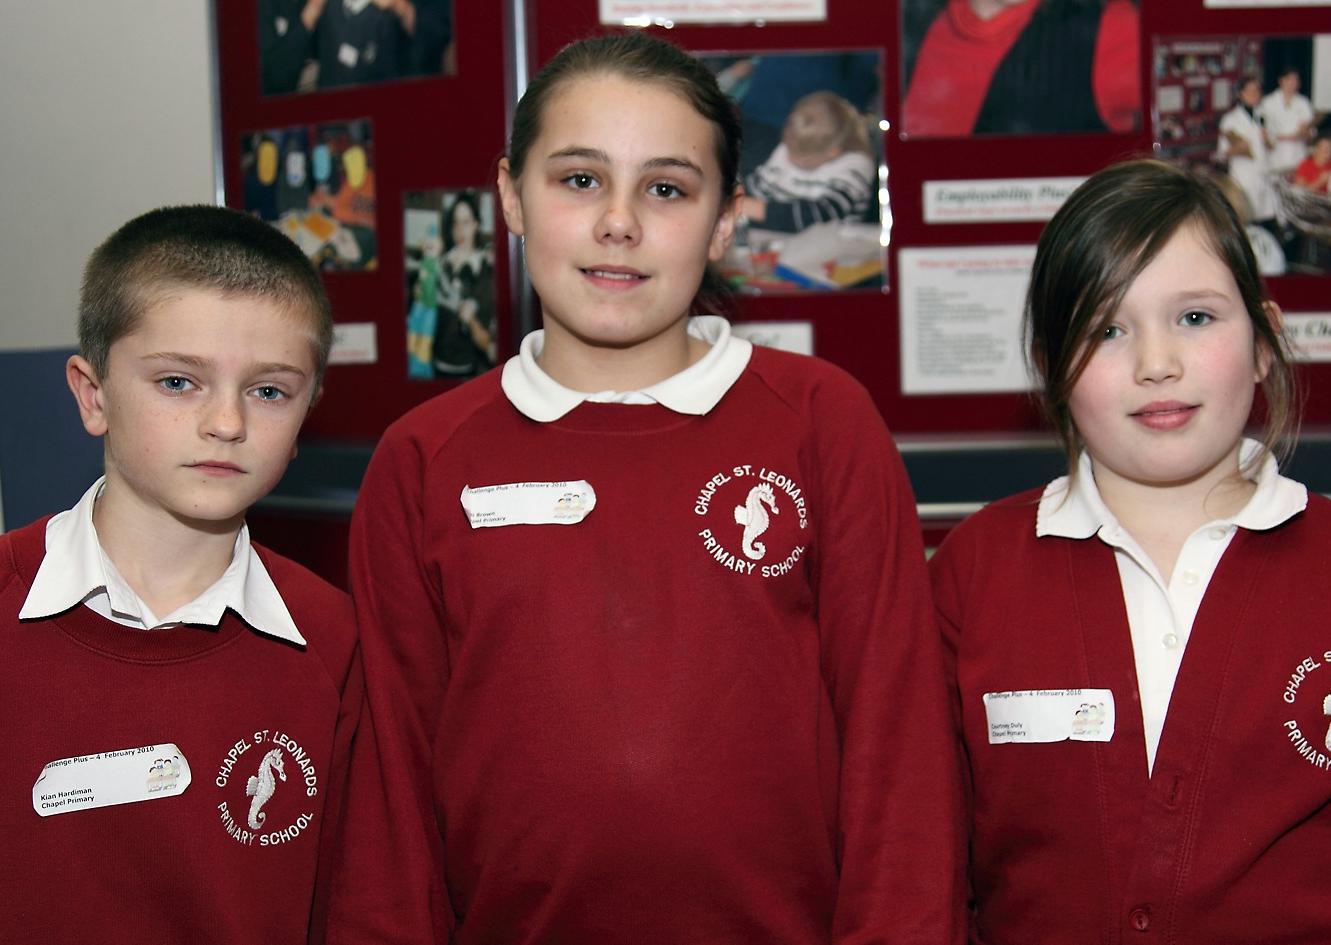 Pictured (from left) Kian Hardiman, Suzi Brown and Courtney Duly.